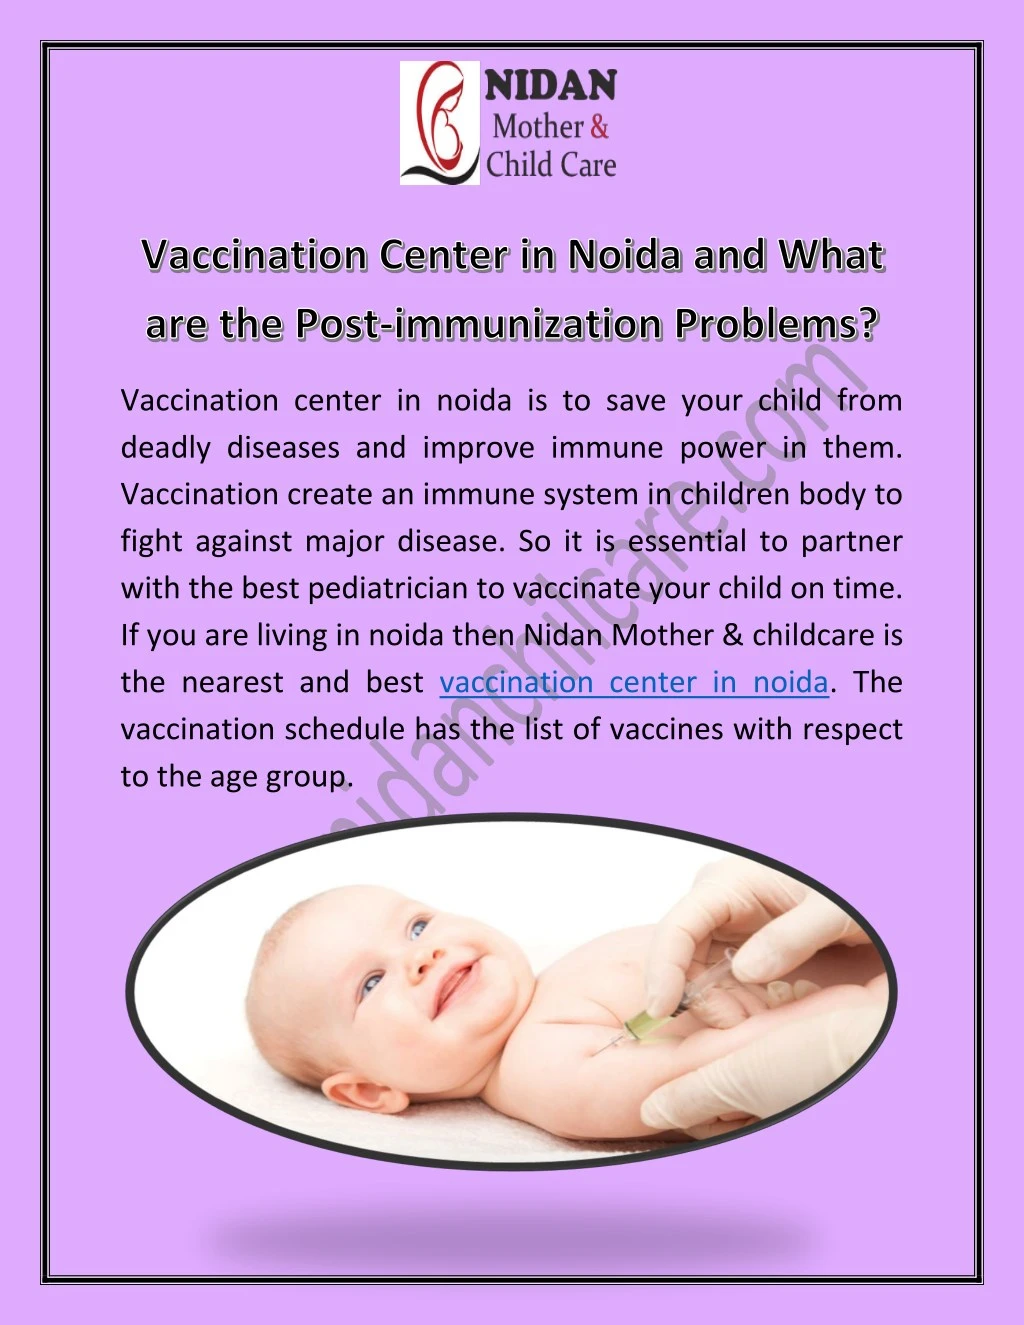 vaccination center in noida is to save your child